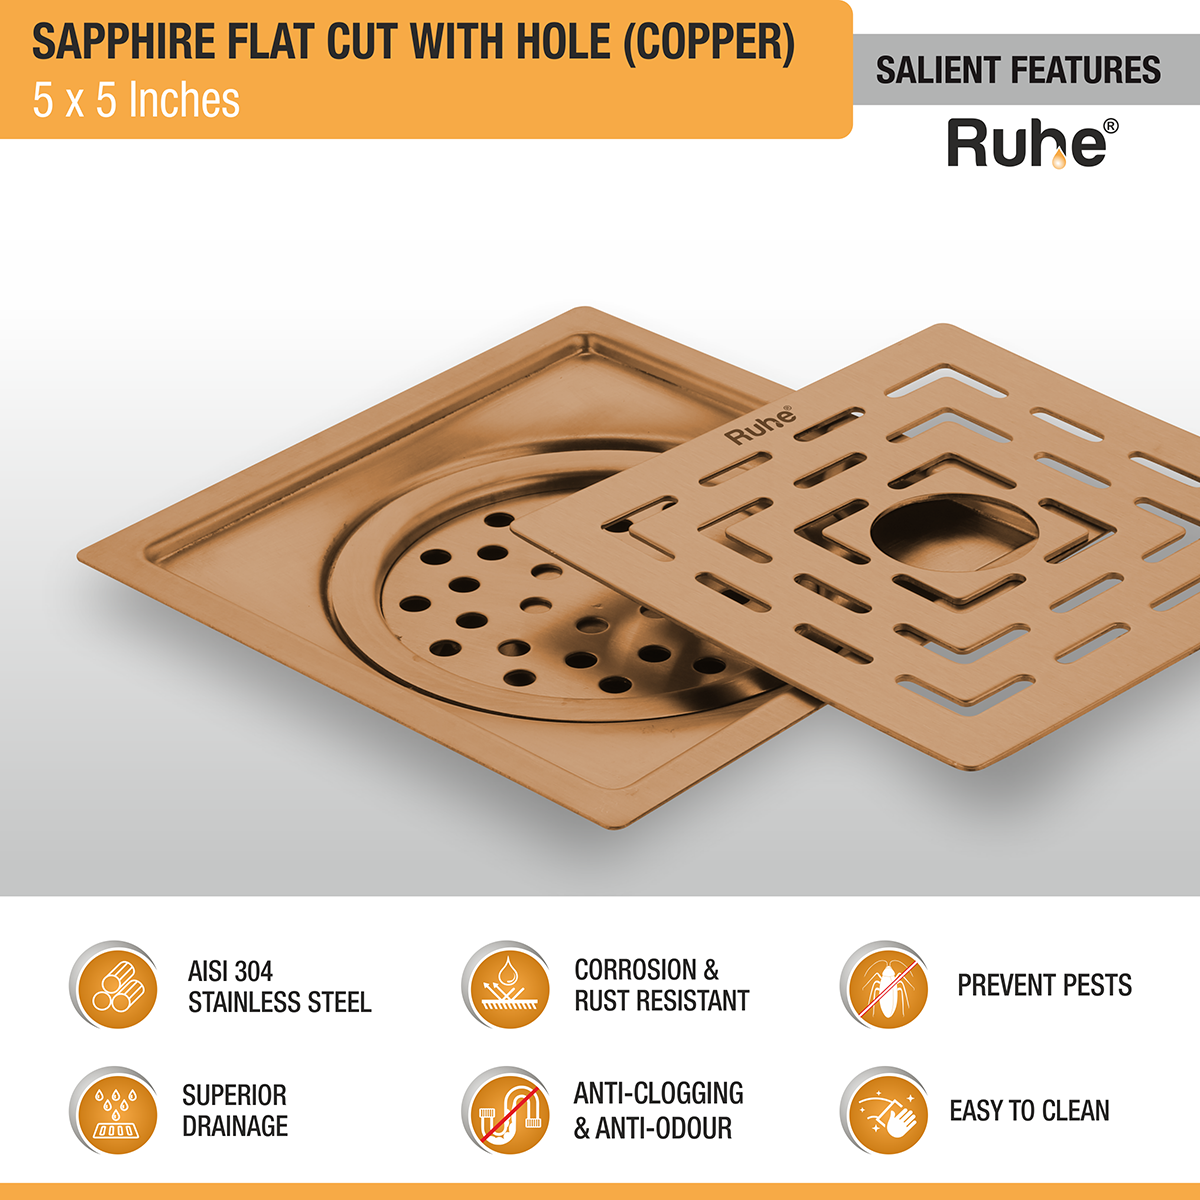 Sapphire Square Flat Cut Floor Drain in Antique Copper PVD Coating (5 x 5 Inches) with Hole features